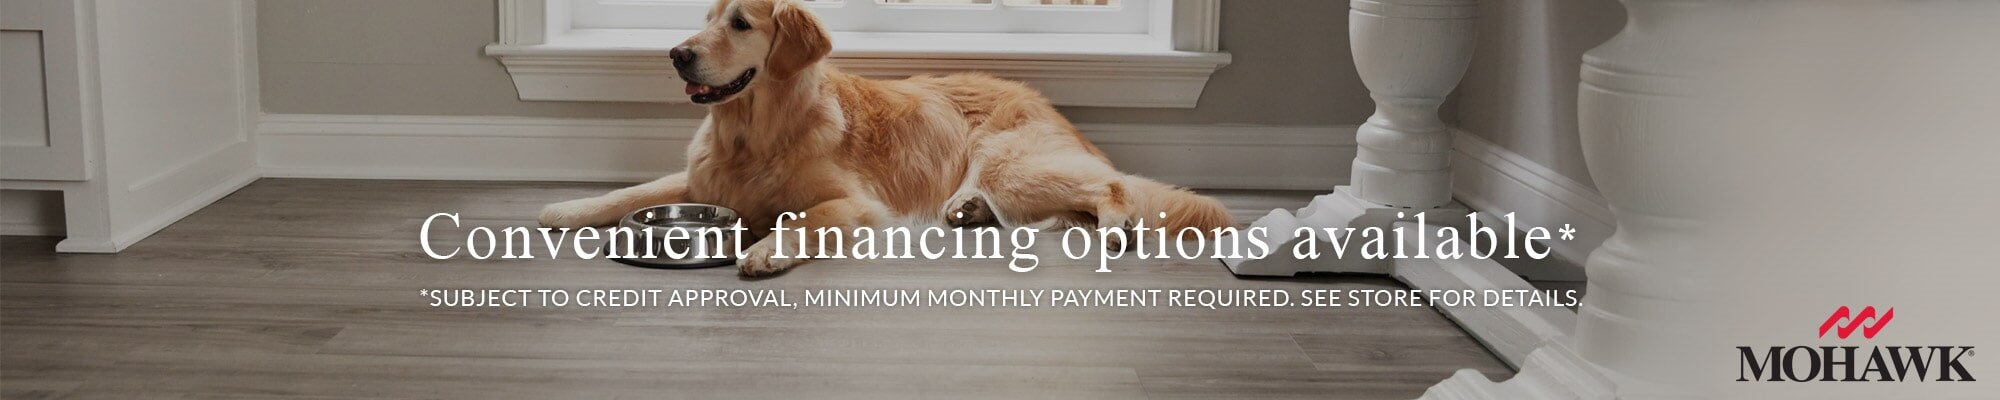 Financing options available at Jerseyville Carpet & Furniture Galleries